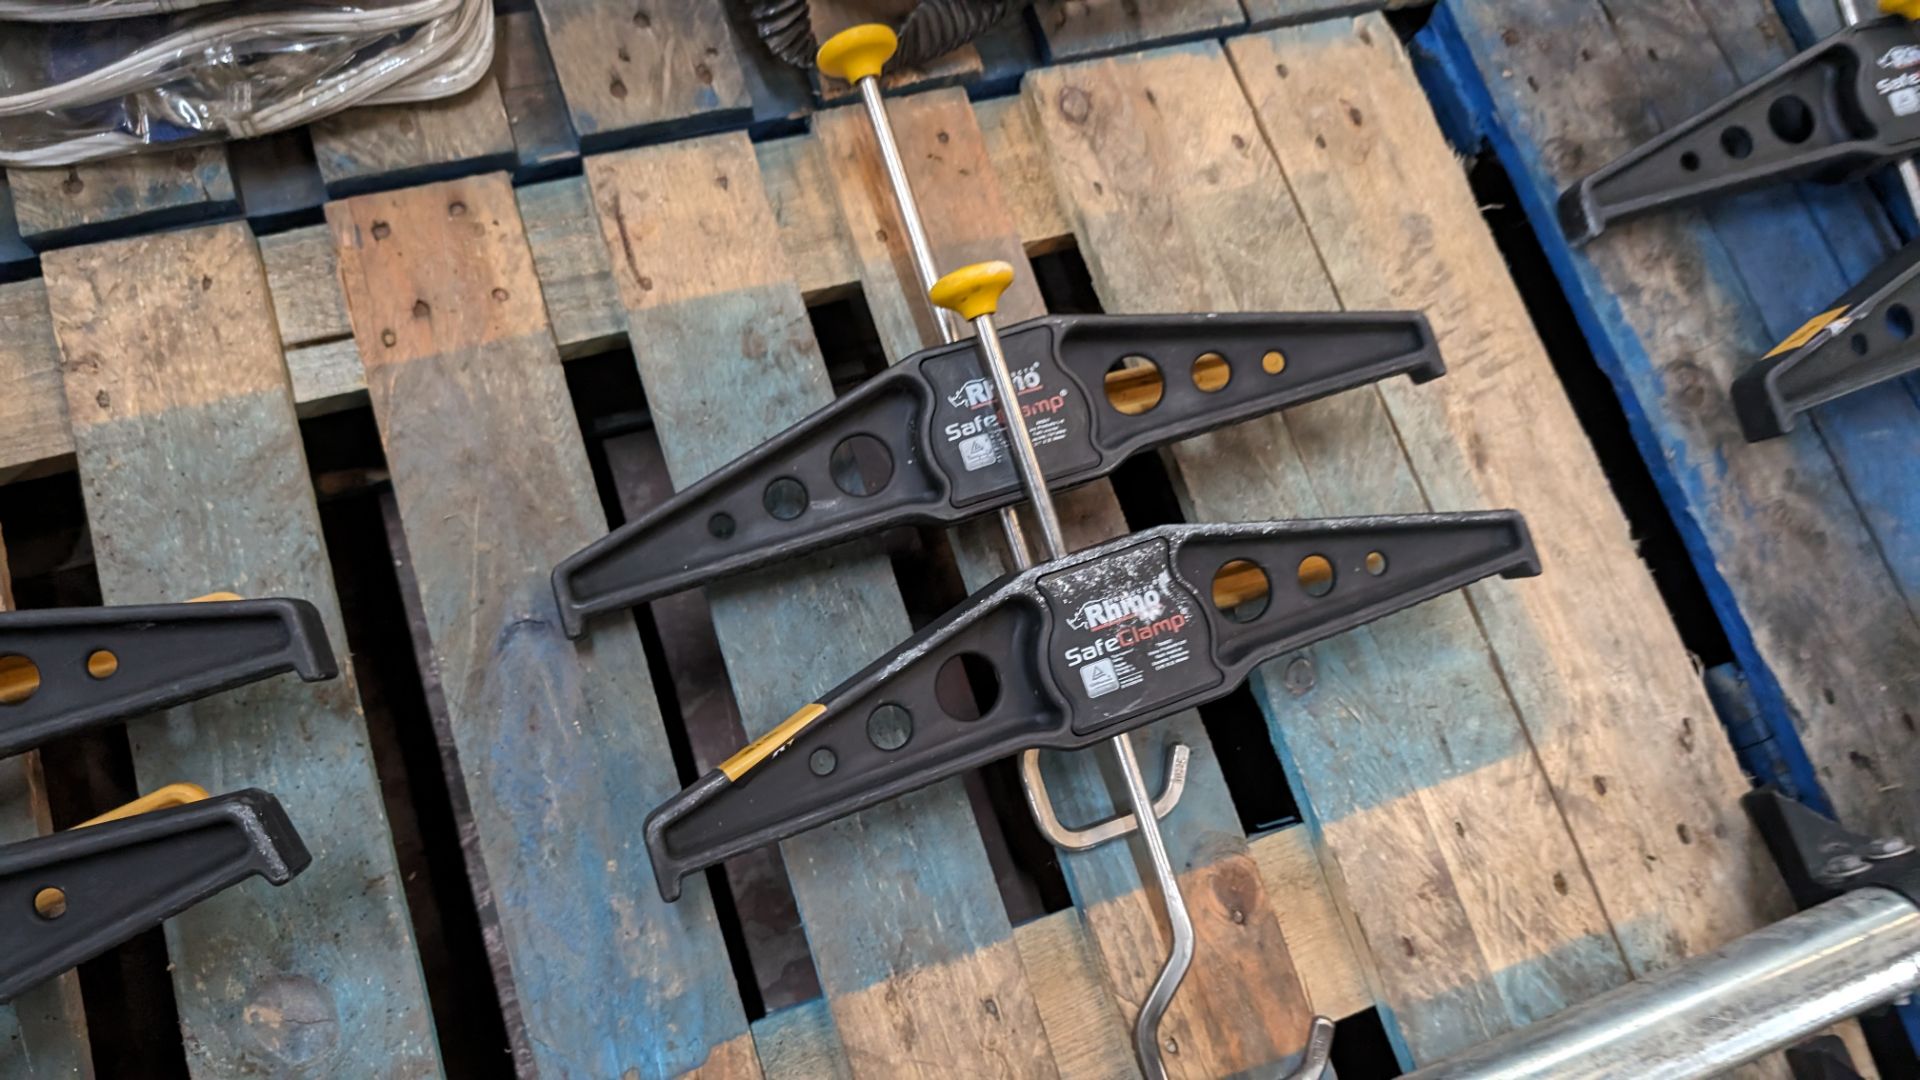 2 off Rhino safe ladder clamps